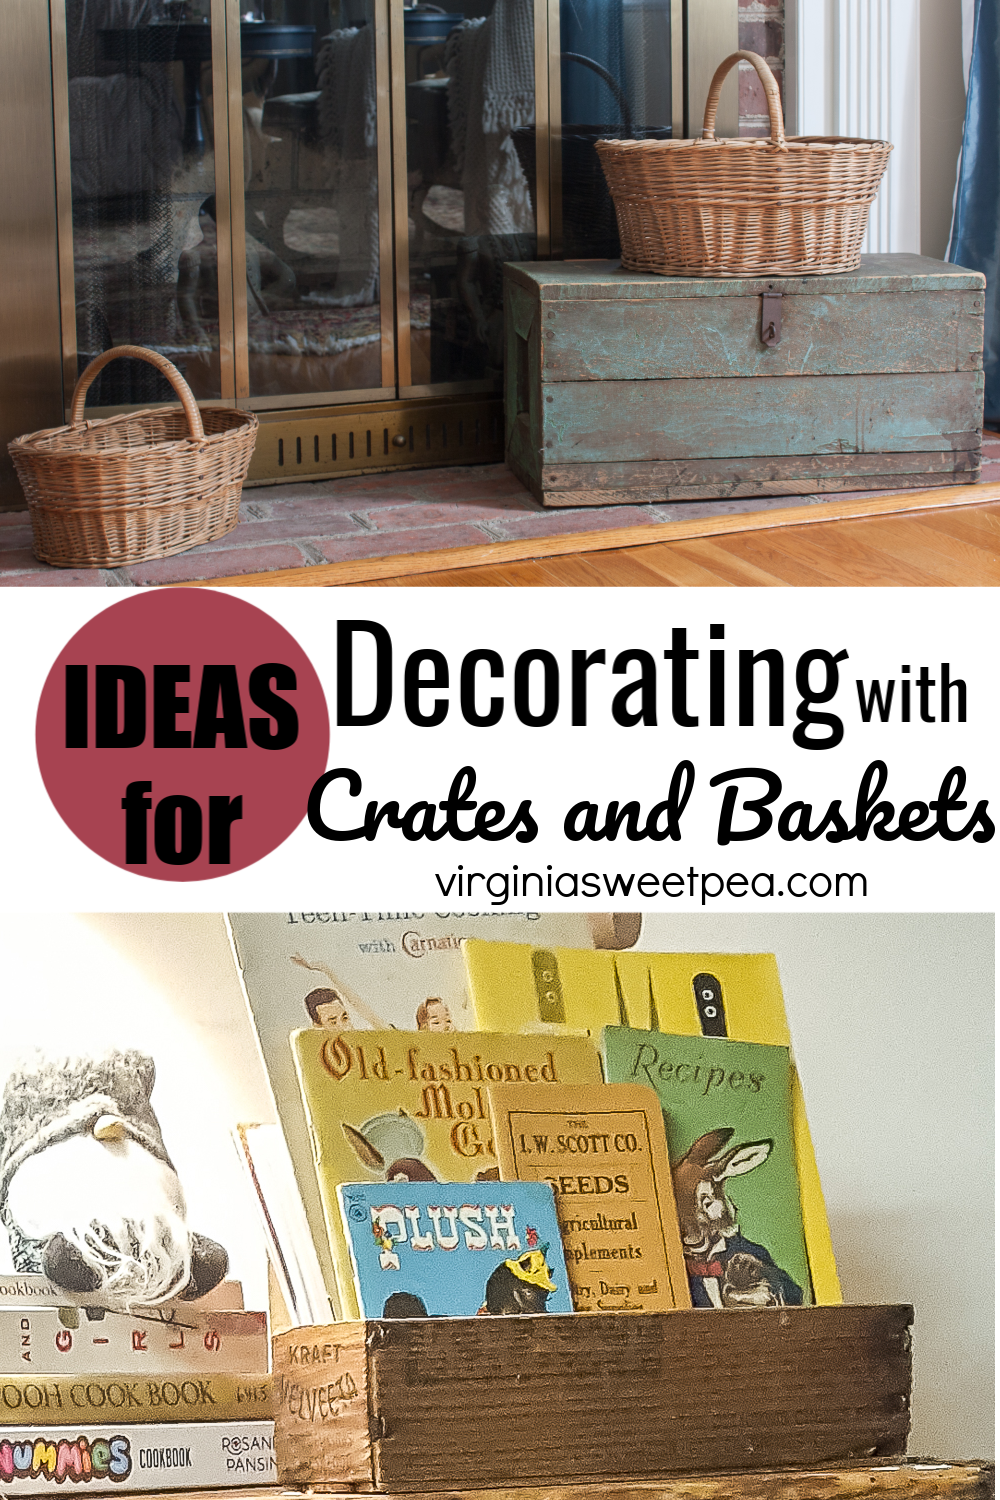 Fun Ways to Use Vintage Finds in your Outdoor Decorating - Lora